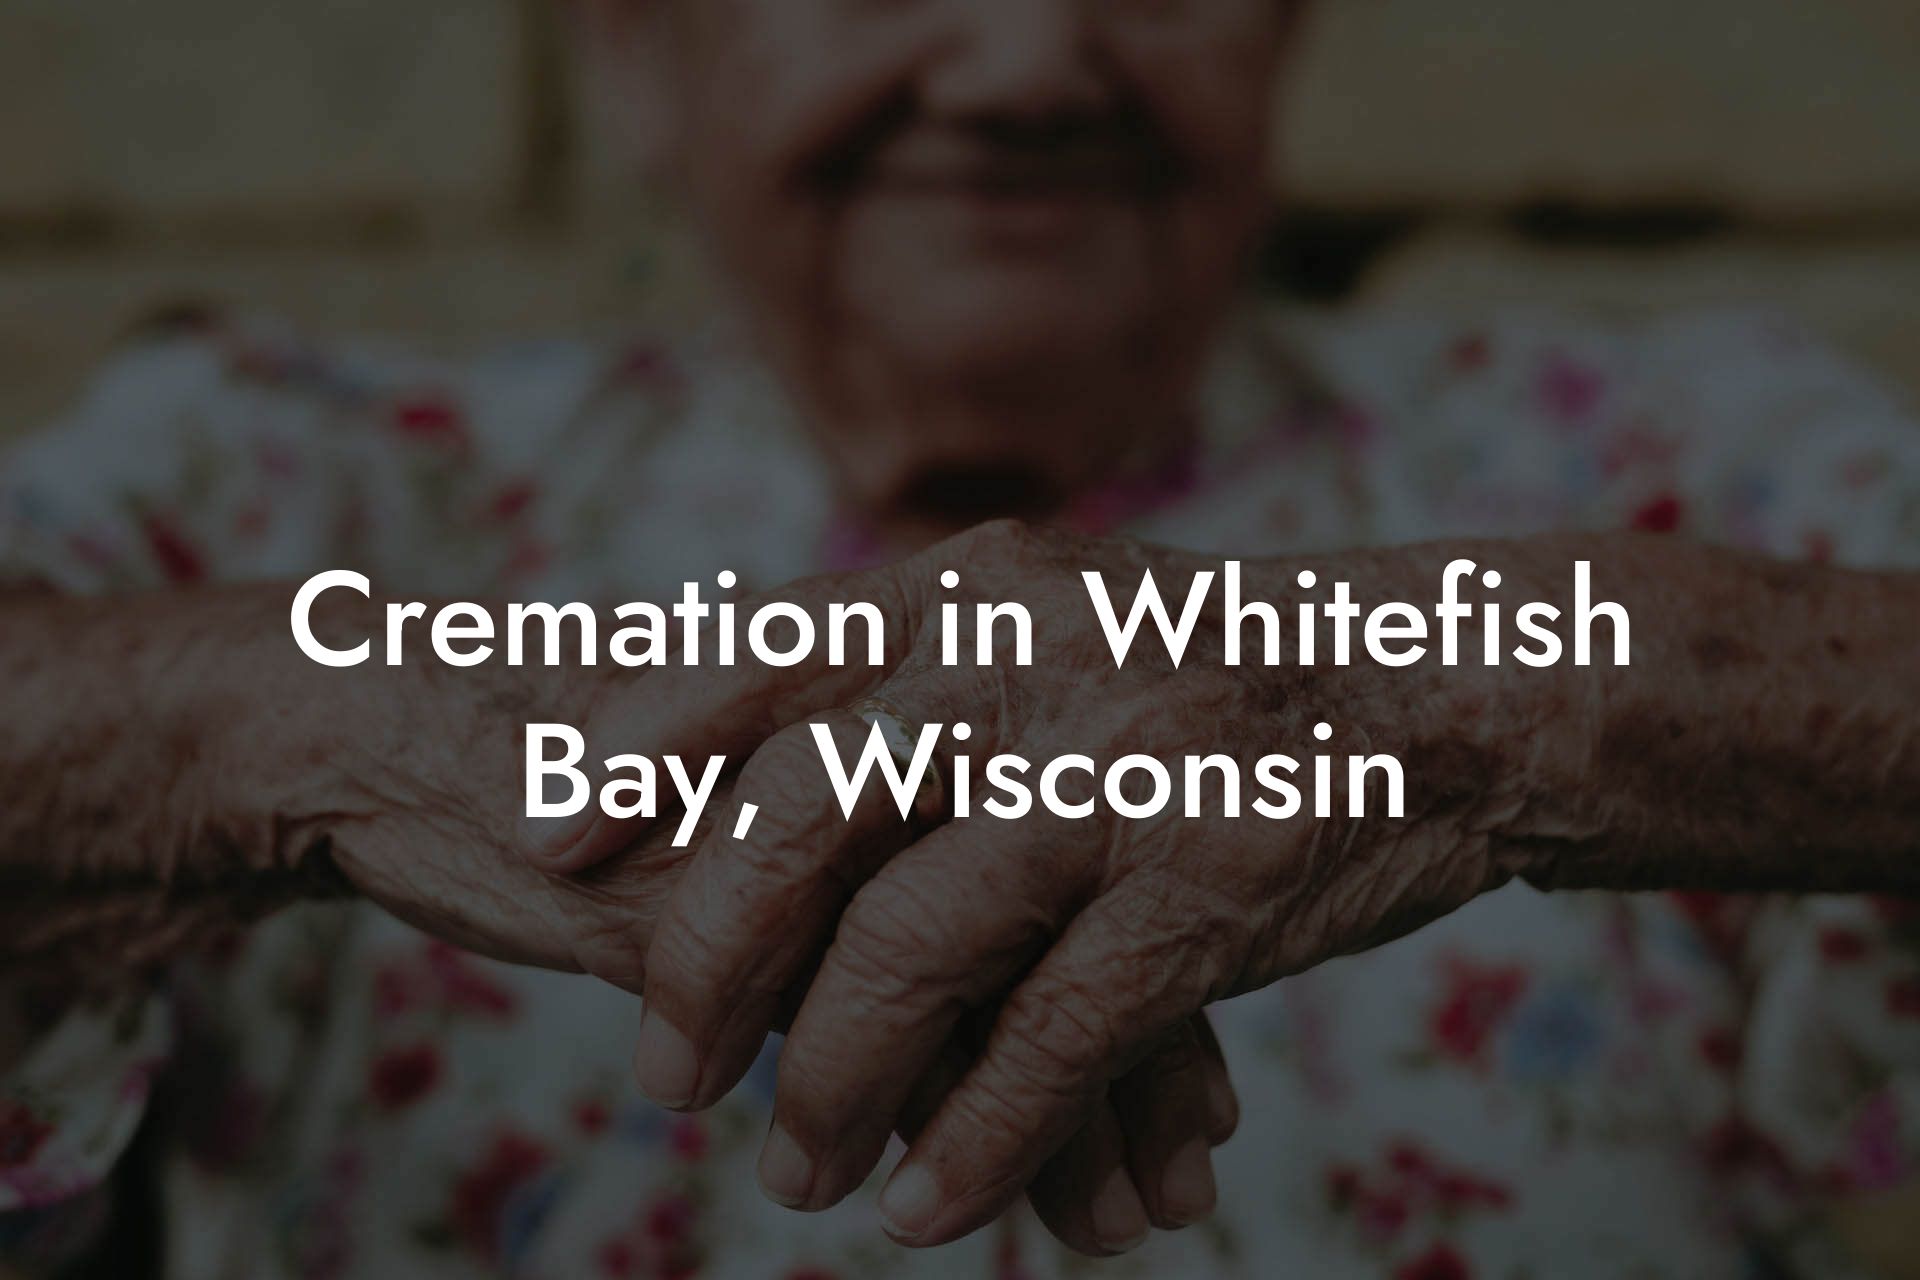 Cremation in Whitefish Bay, Wisconsin